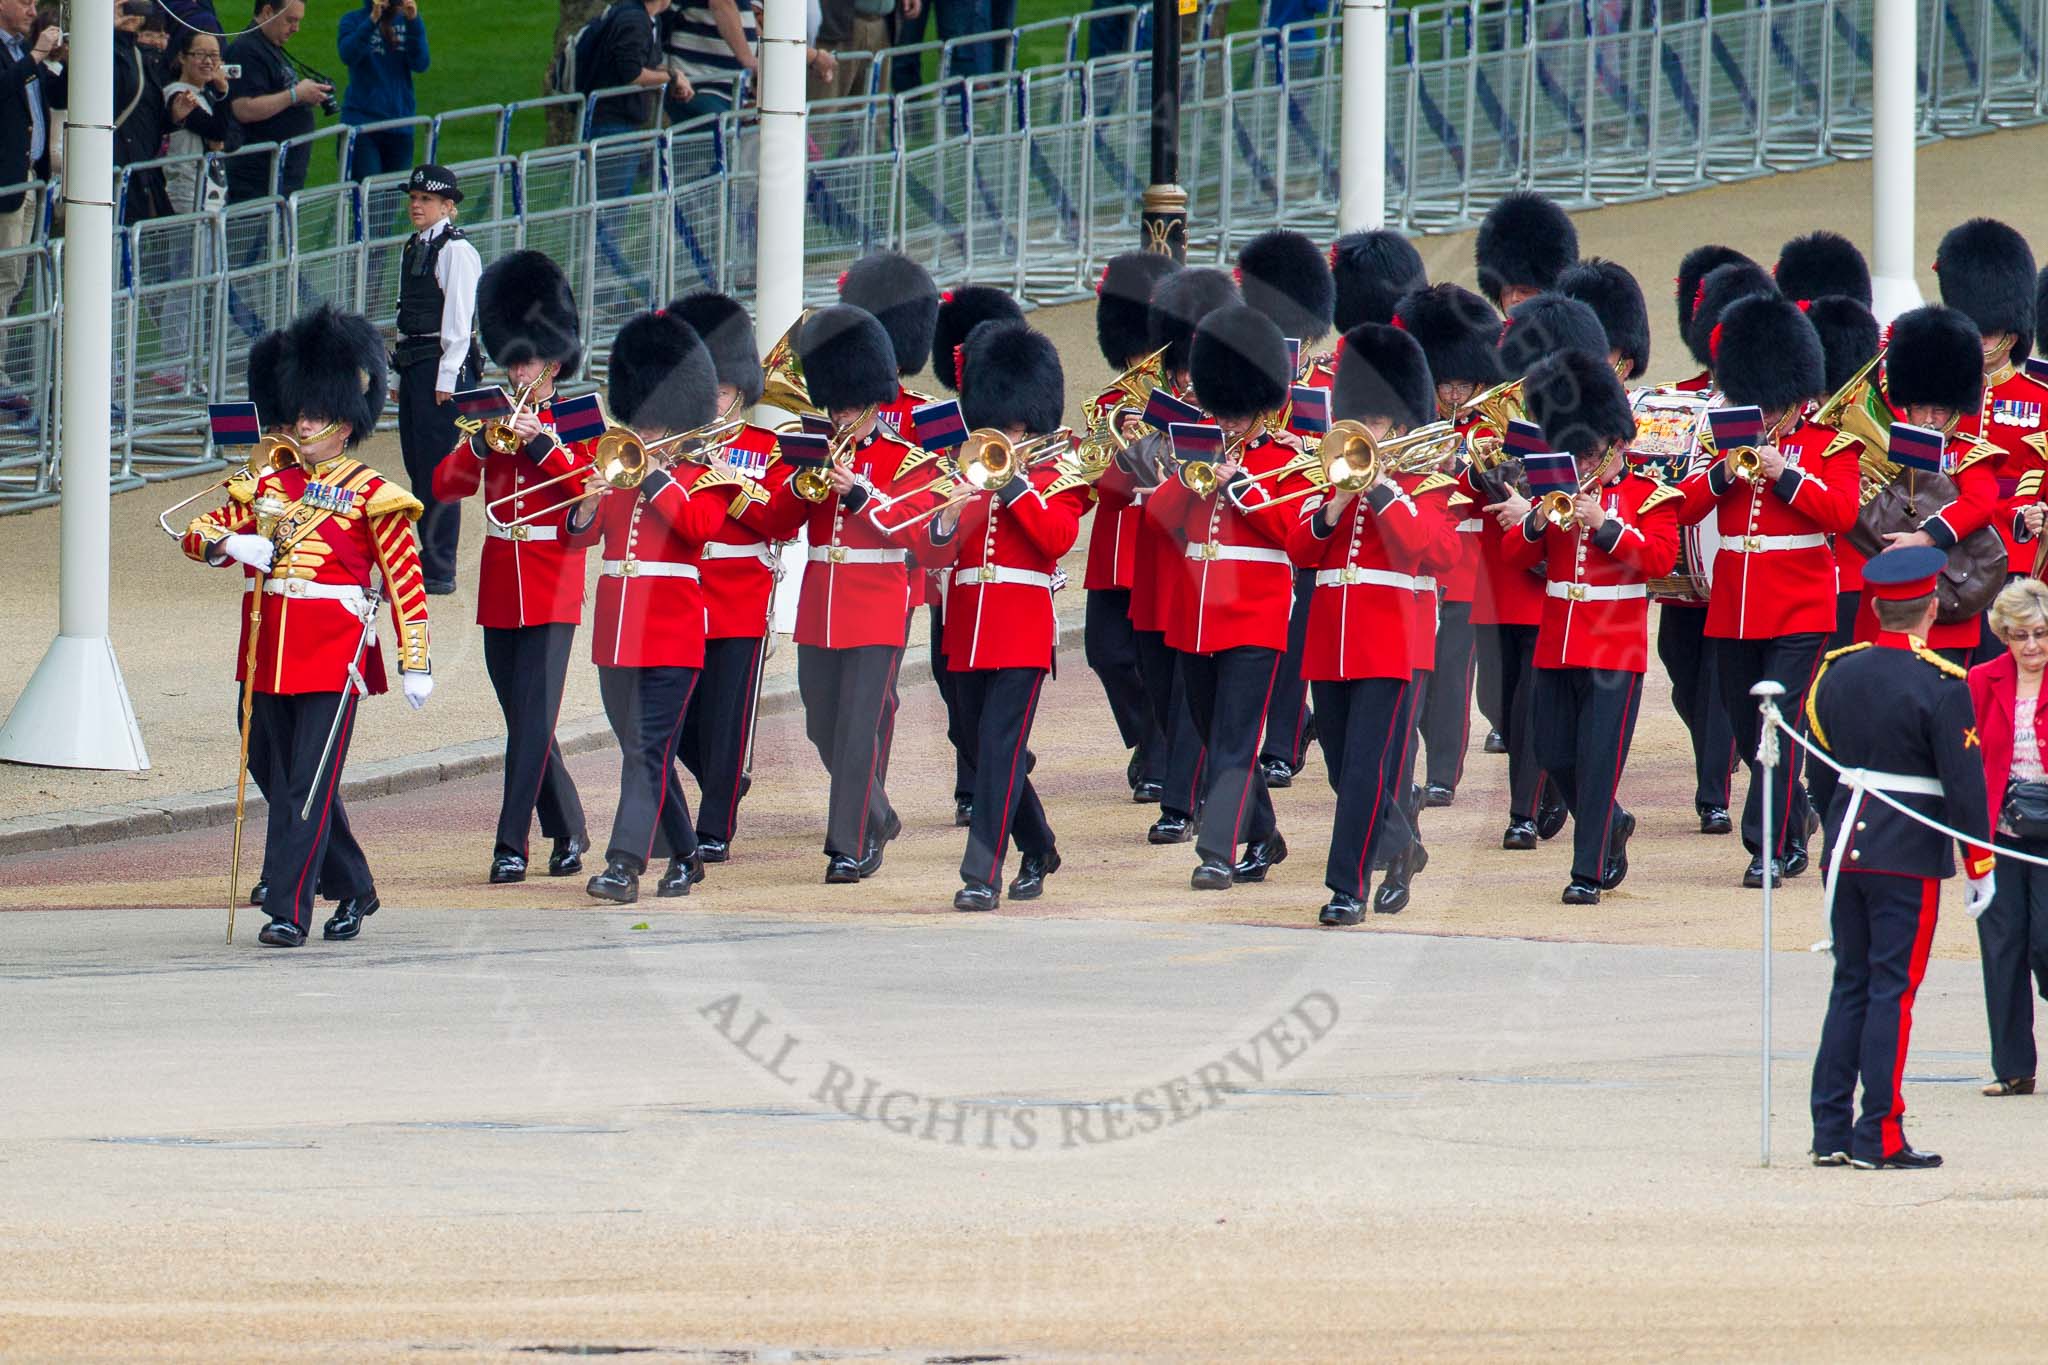 Major General's Review 2013: The first of the bands marching down Horse Guards Road from The Mall - the Band of the Coldstream Guards, lead by Senior Drum Major Matthew Betts, Grenadier Guards..
Horse Guards Parade, Westminster,
London SW1,

United Kingdom,
on 01 June 2013 at 10:12, image #36